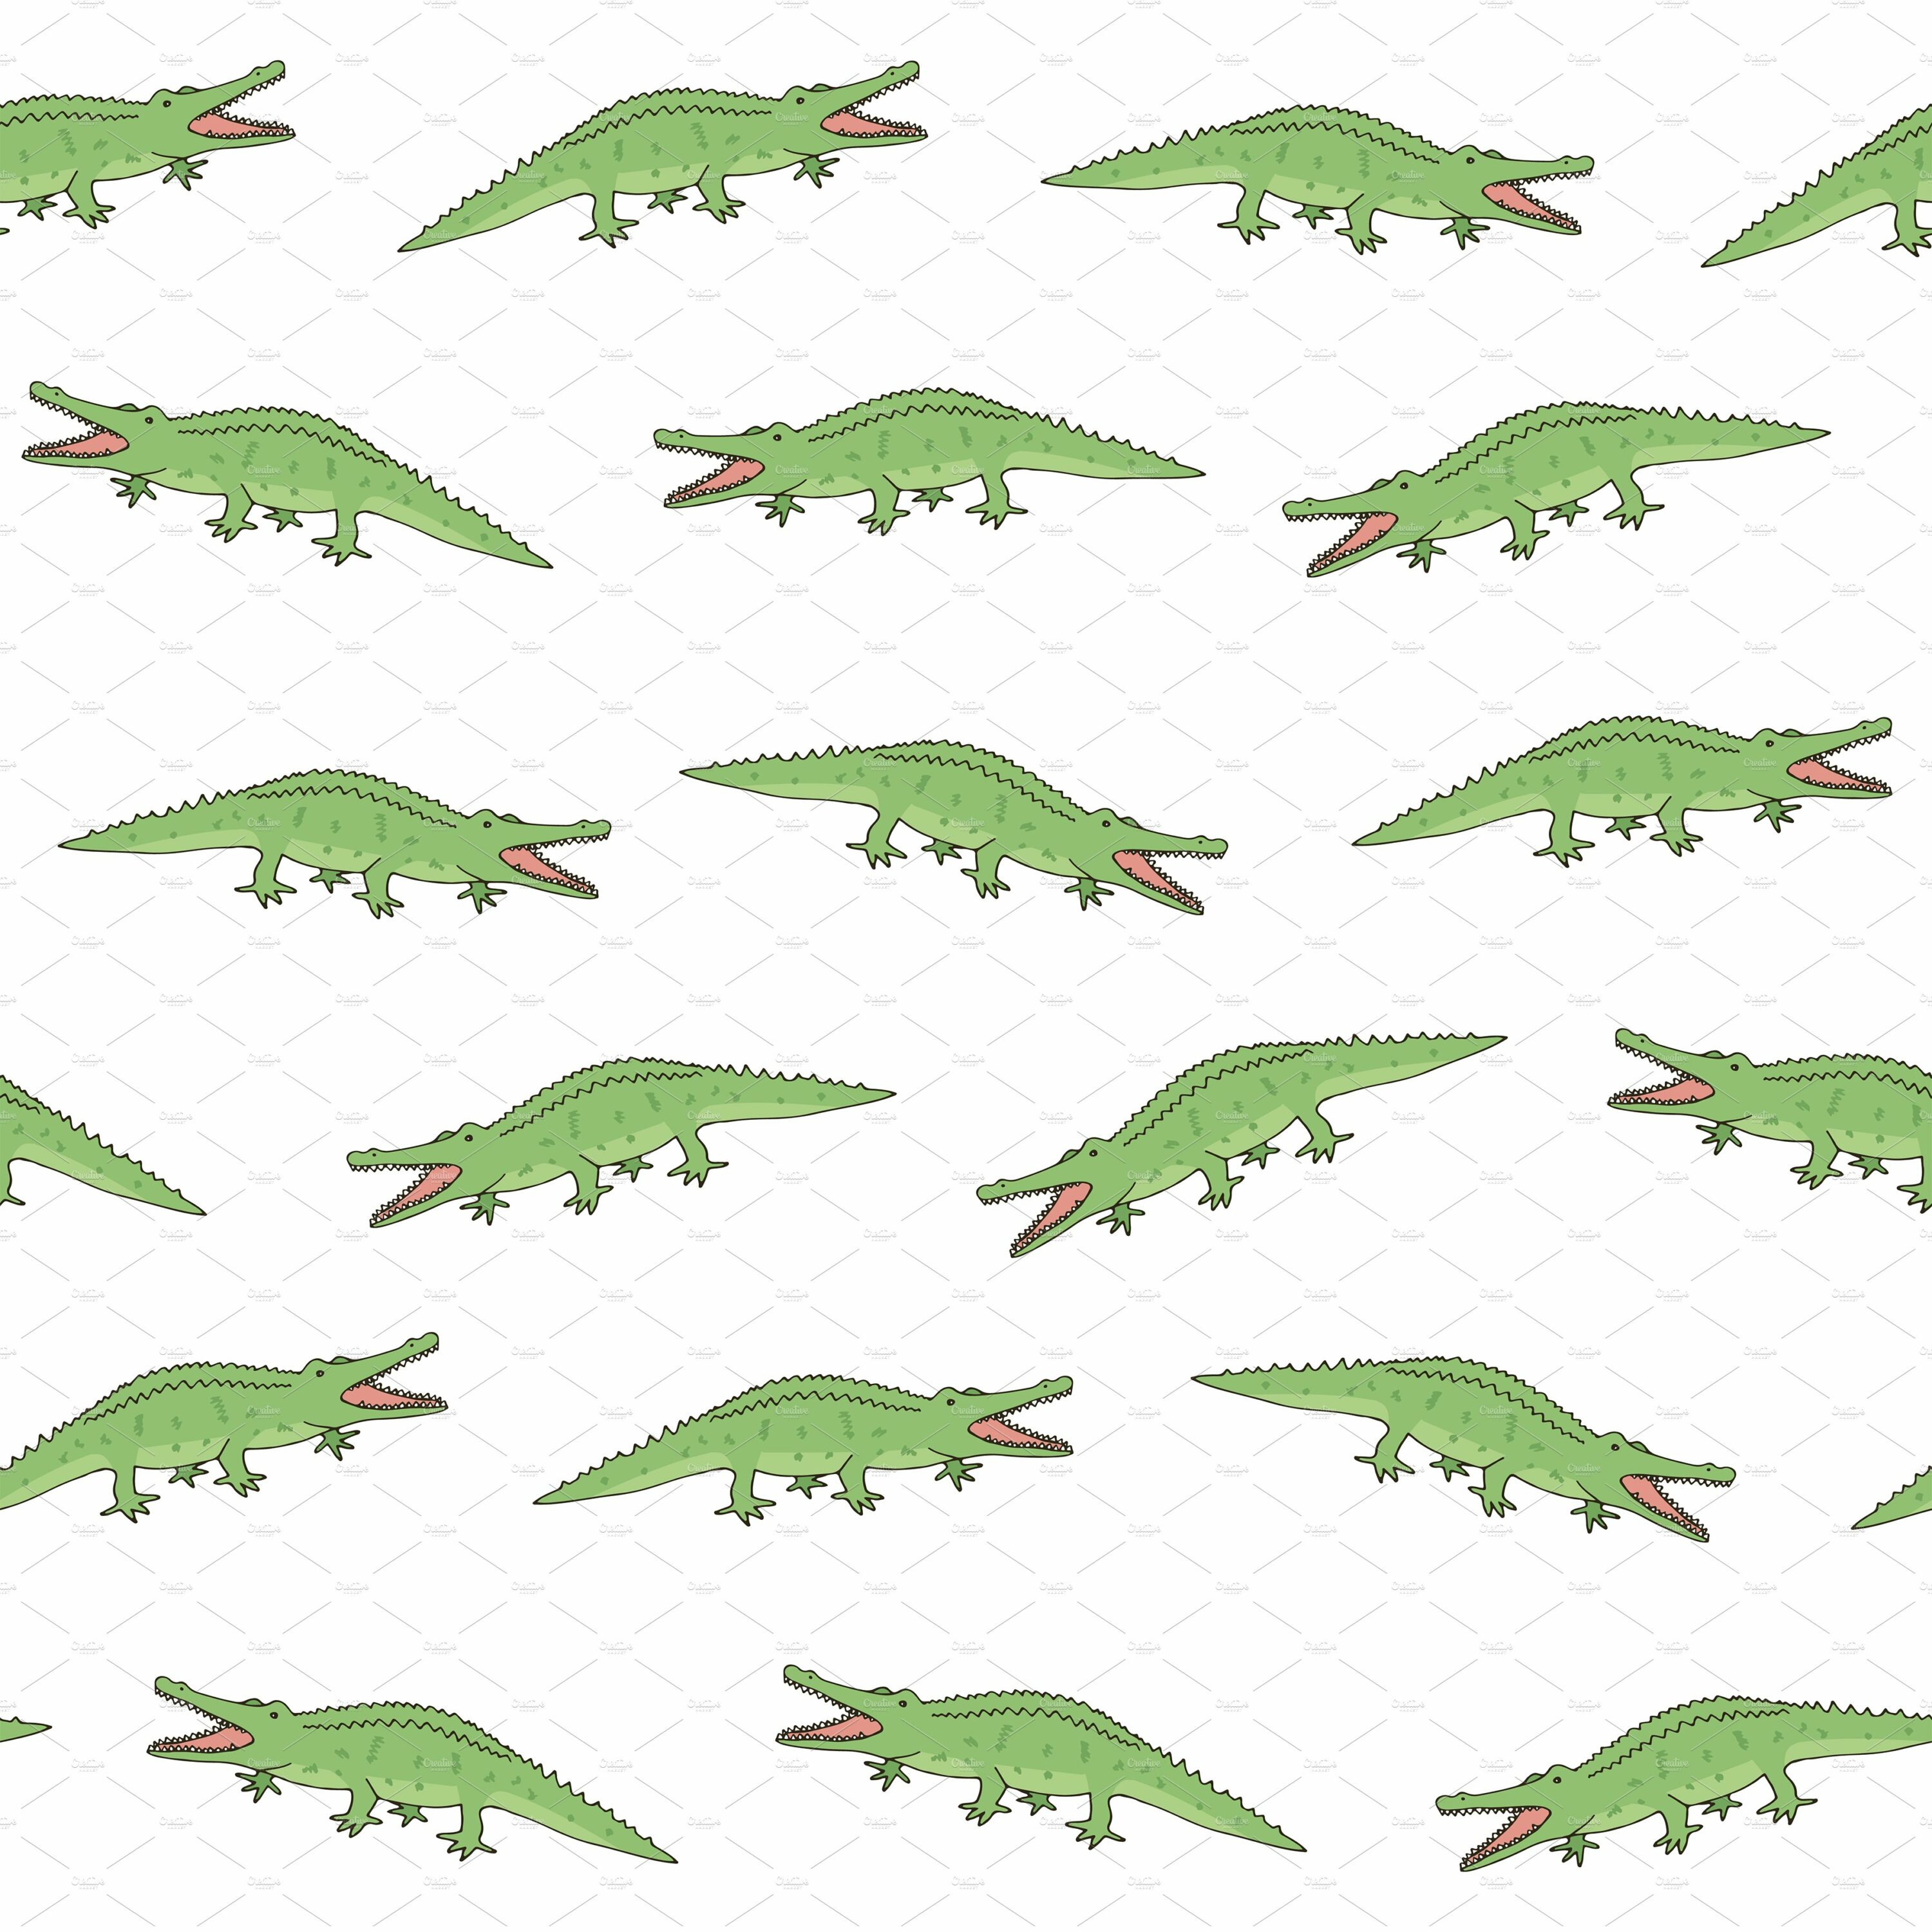 Green crocodiles on the white background.